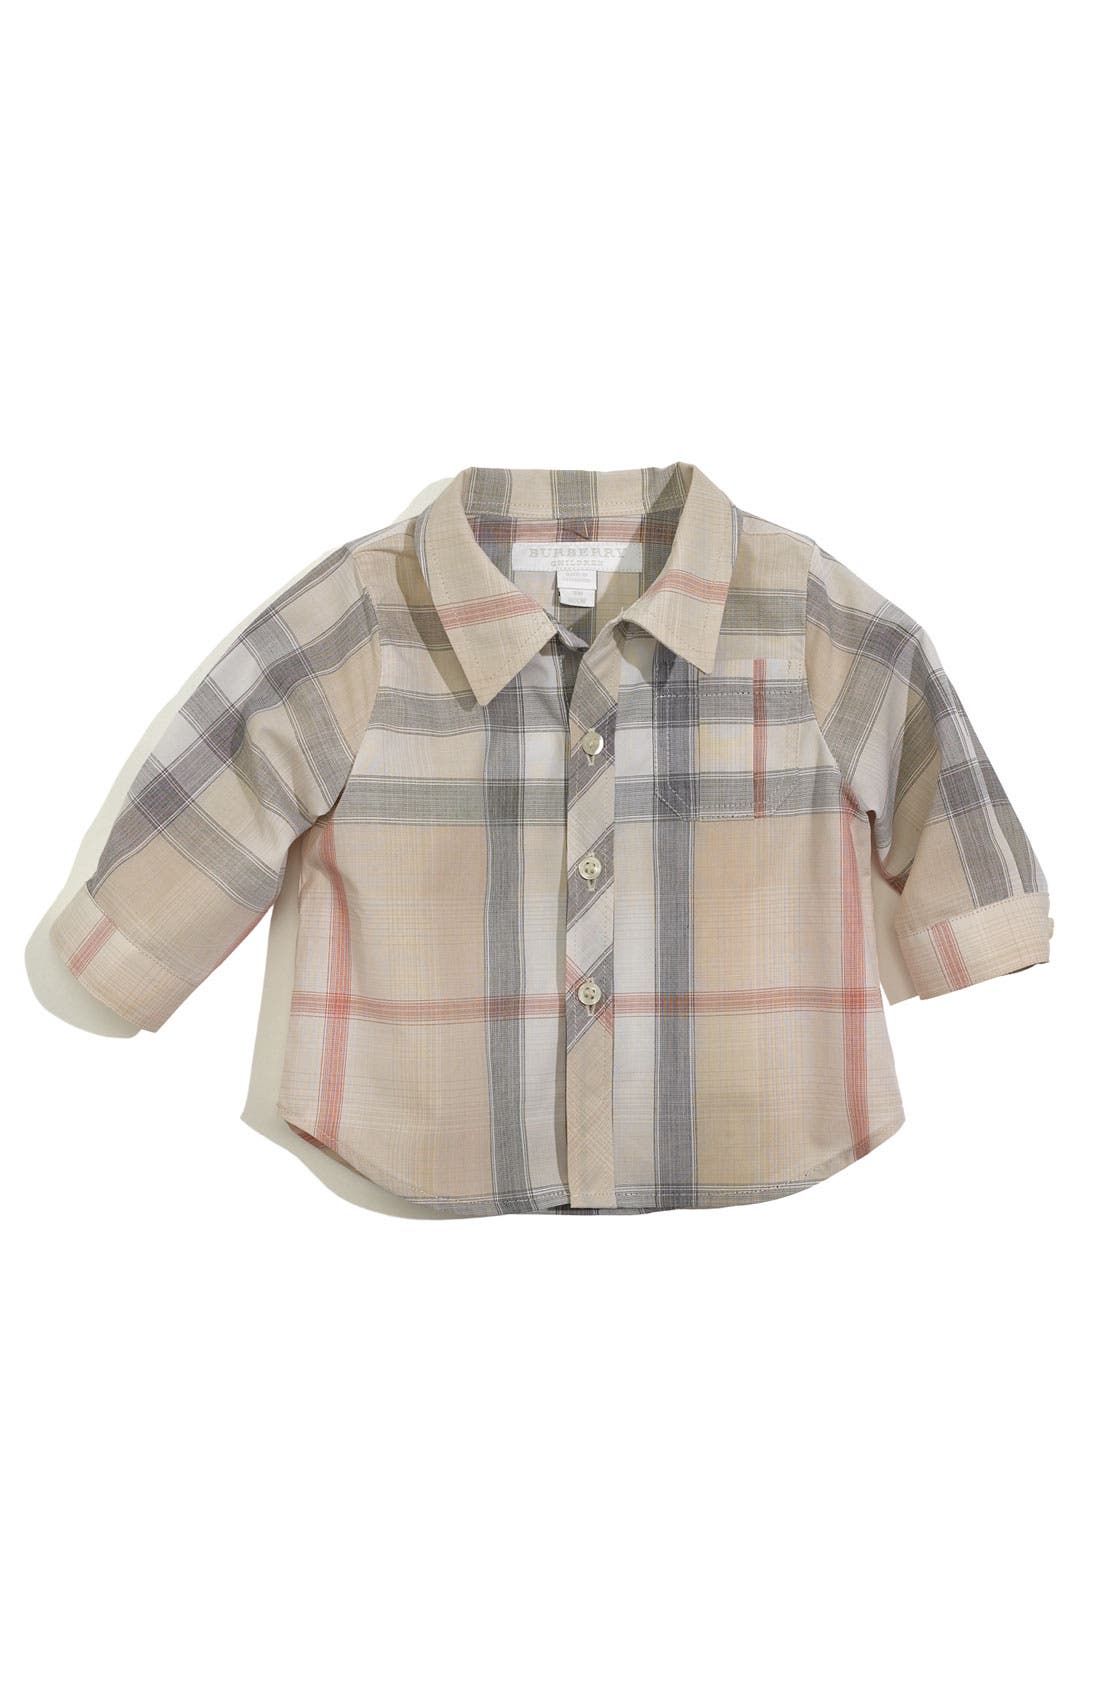 Burberry Infant Check Shirt Sale, 55% OFF | www.alforja.cat